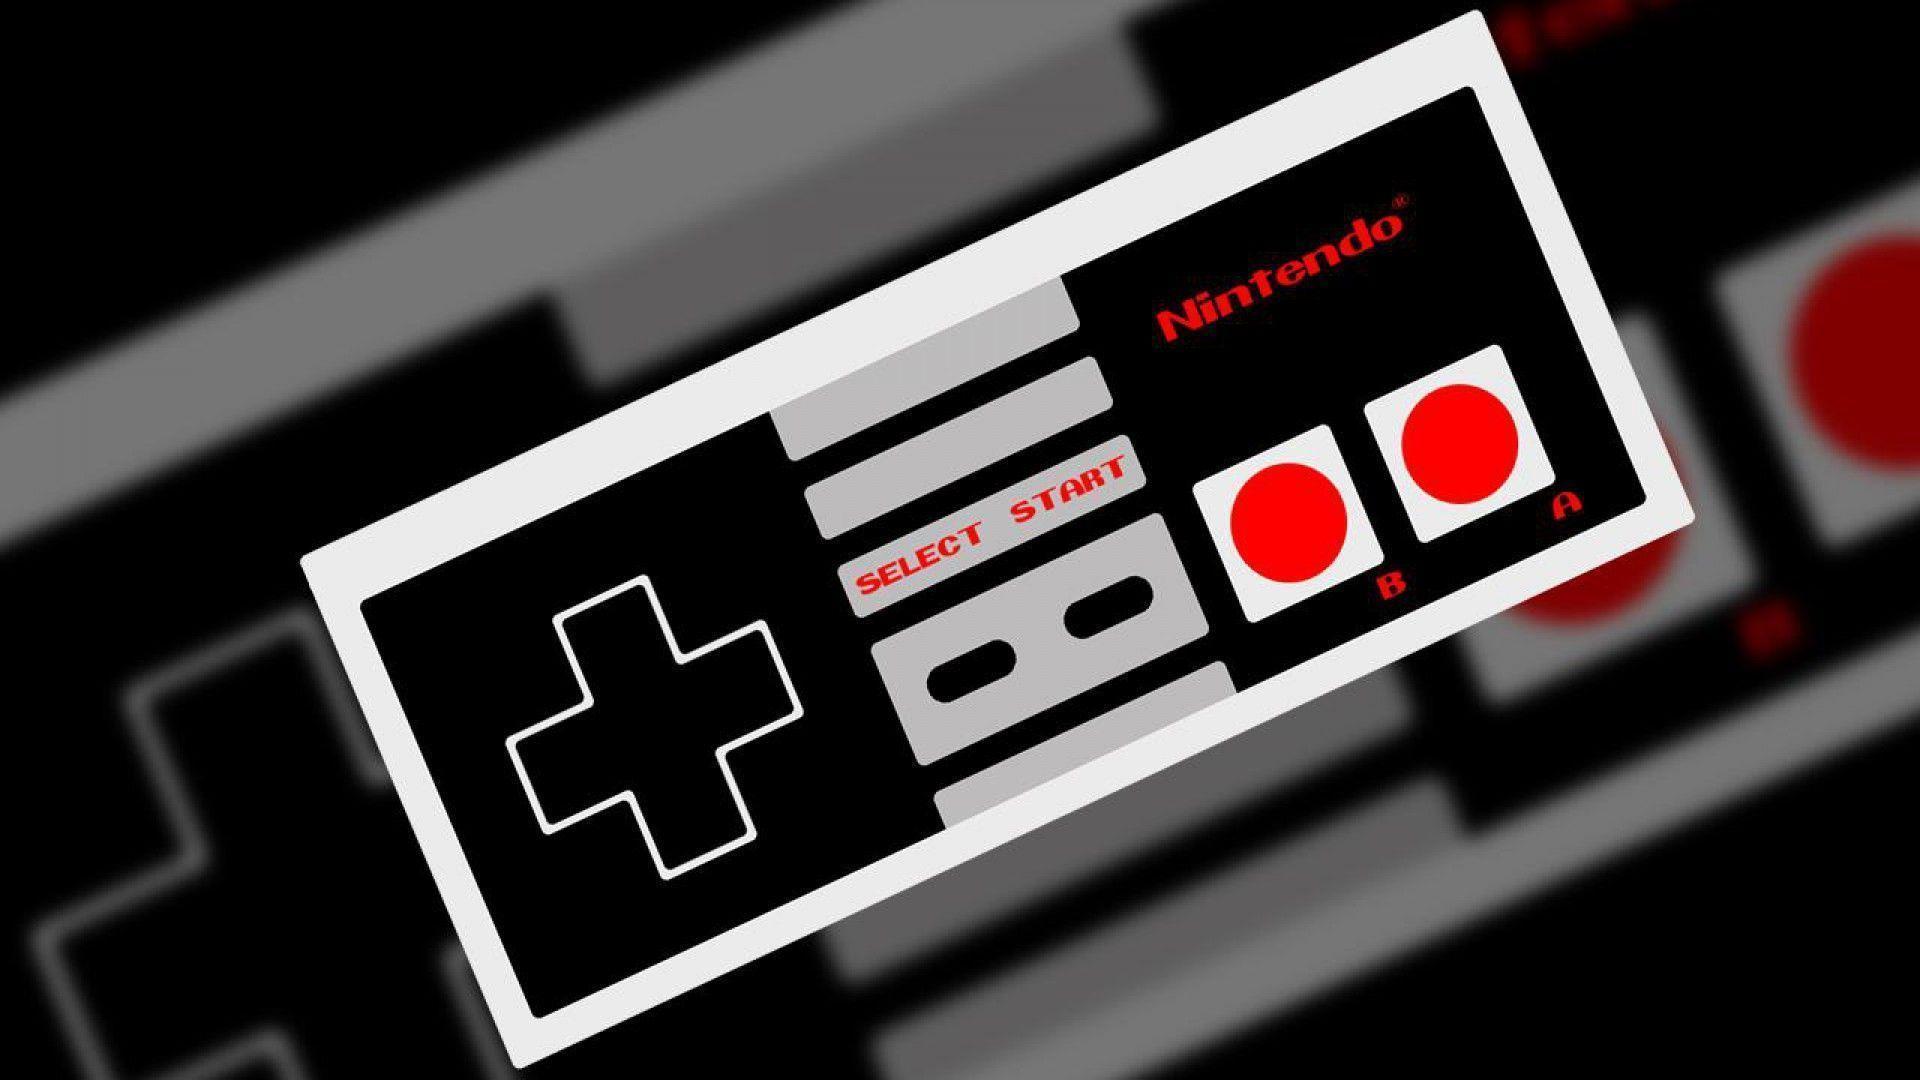 Awesome Computer Nintendo Wallpapers 1920x1080PX ~ Nintendo